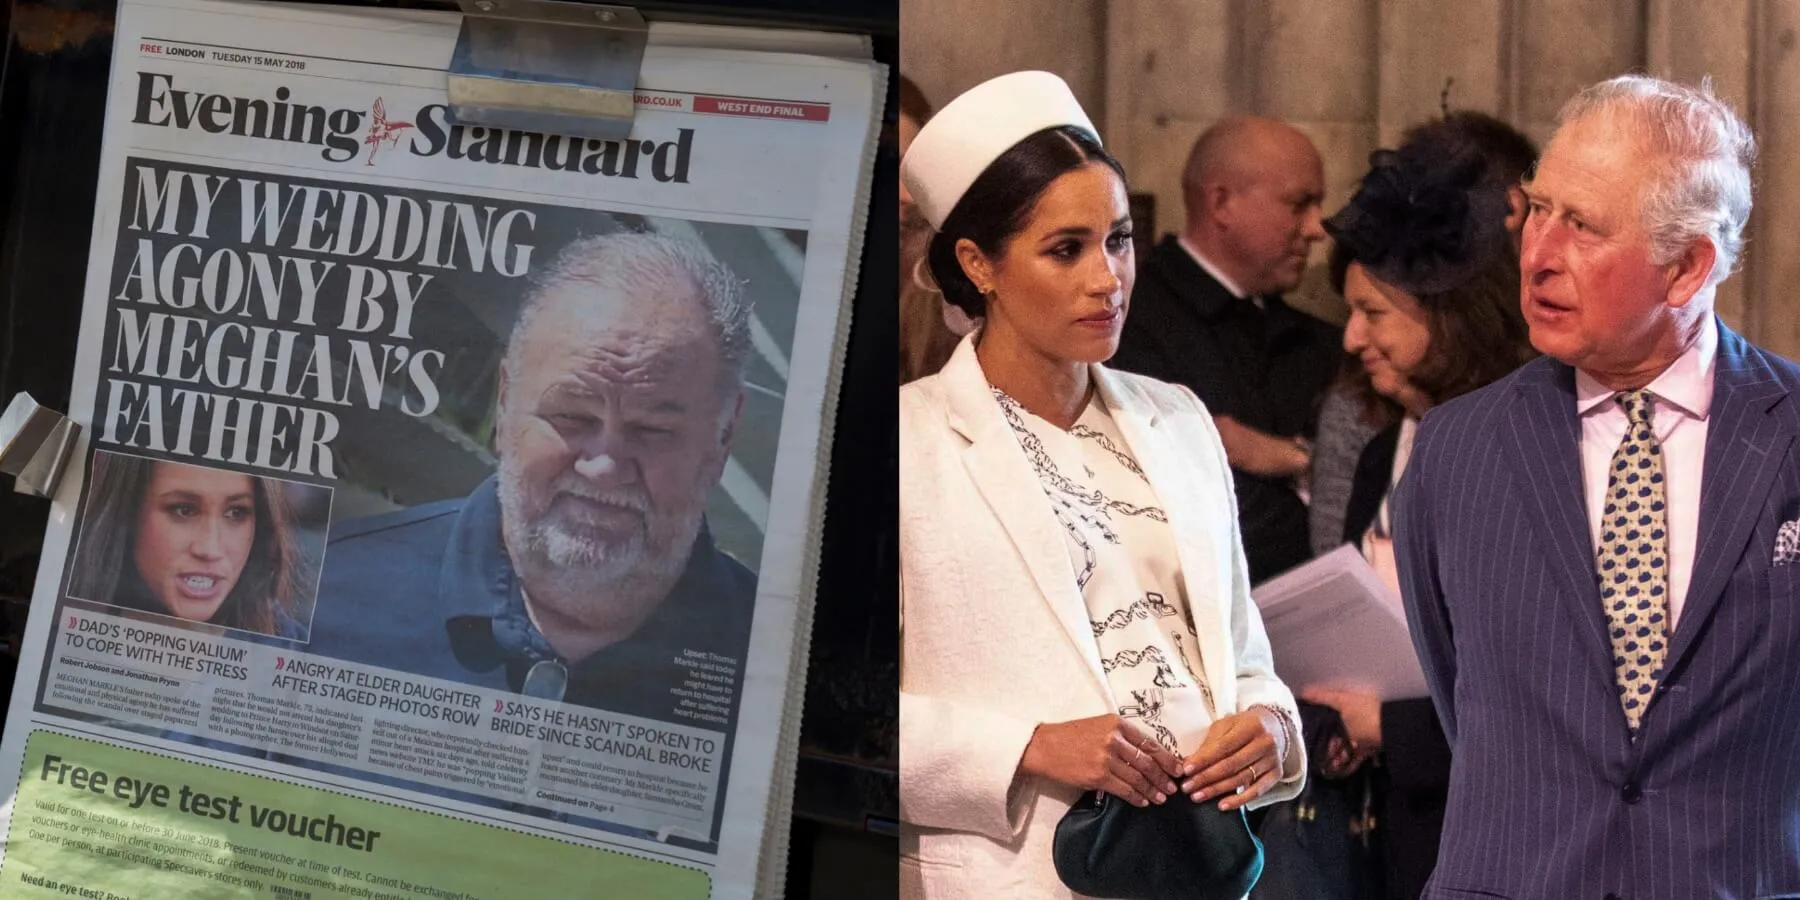 Side-by-side photos of Thomas Markle, Meghan Markle, and King Charles